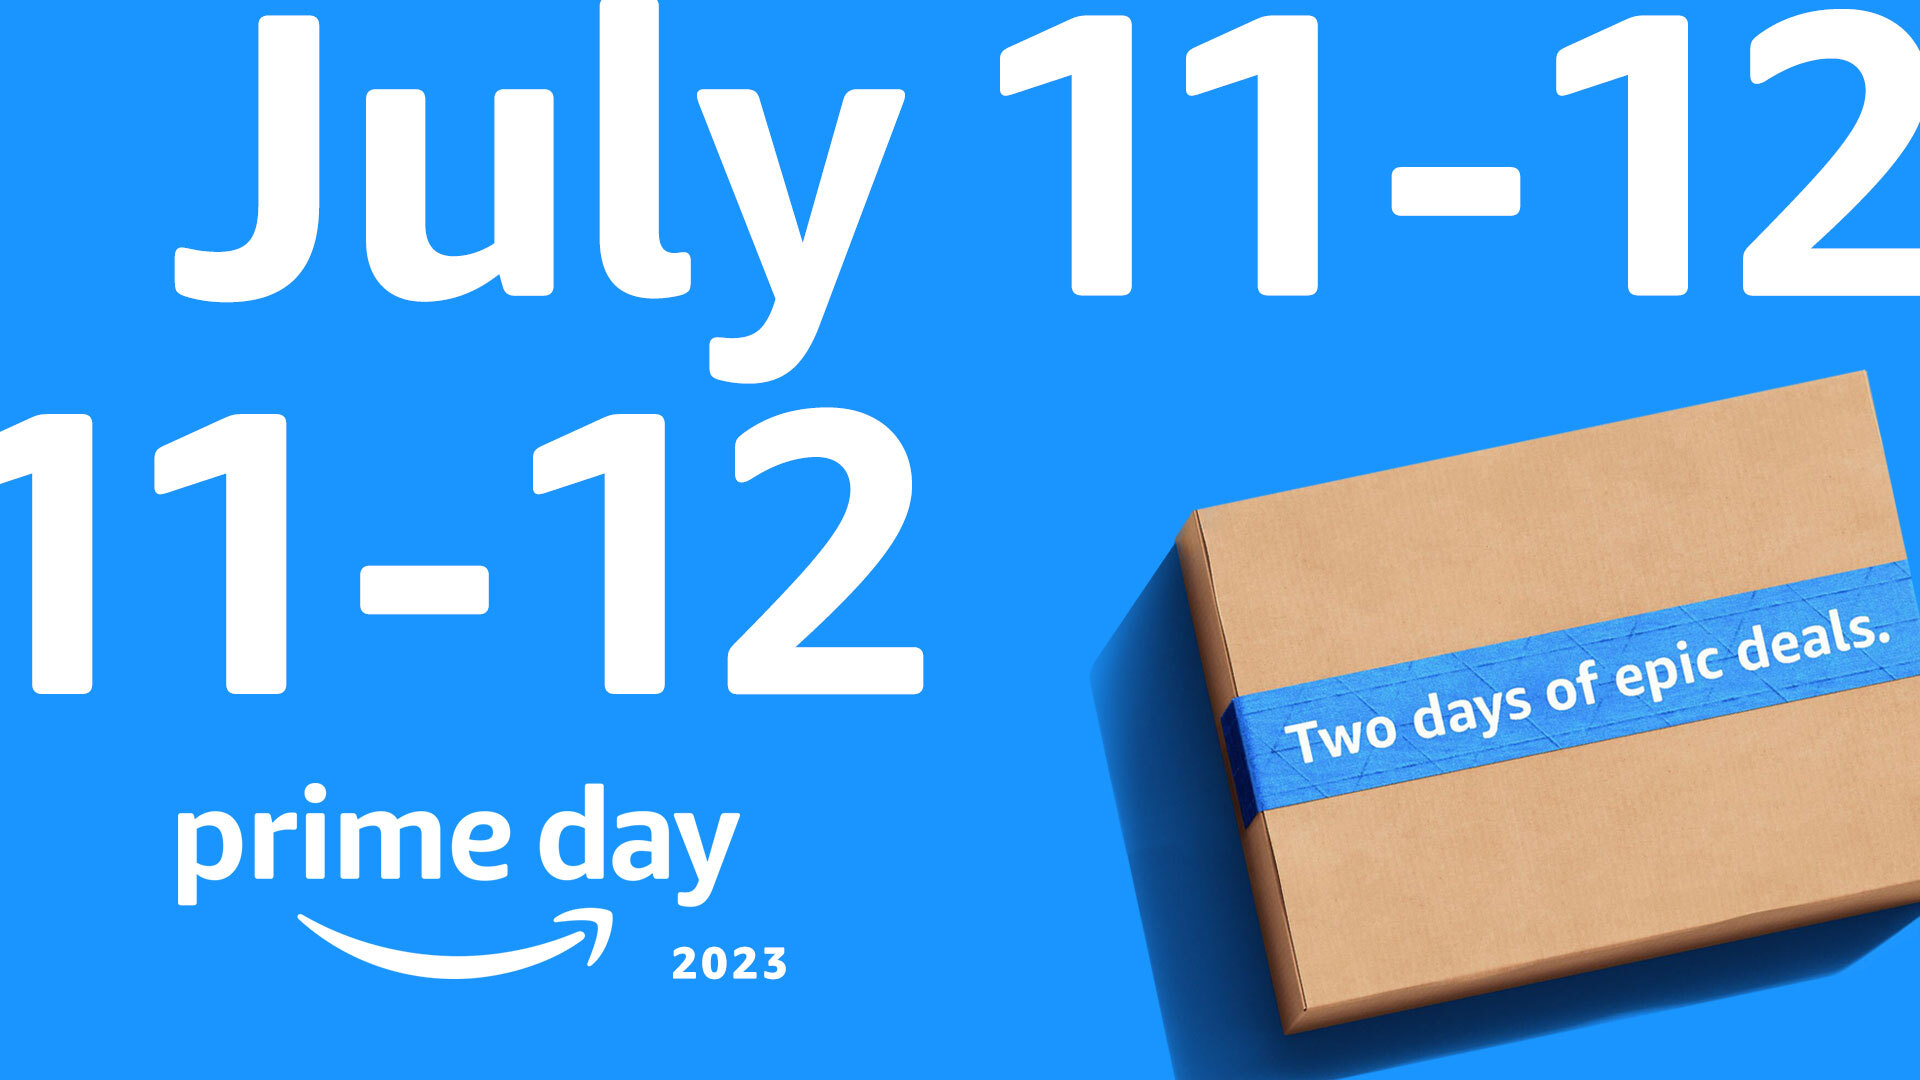 Amazon's Fire TV Stick Was The Best Selling Device on Prime Day 2023 As